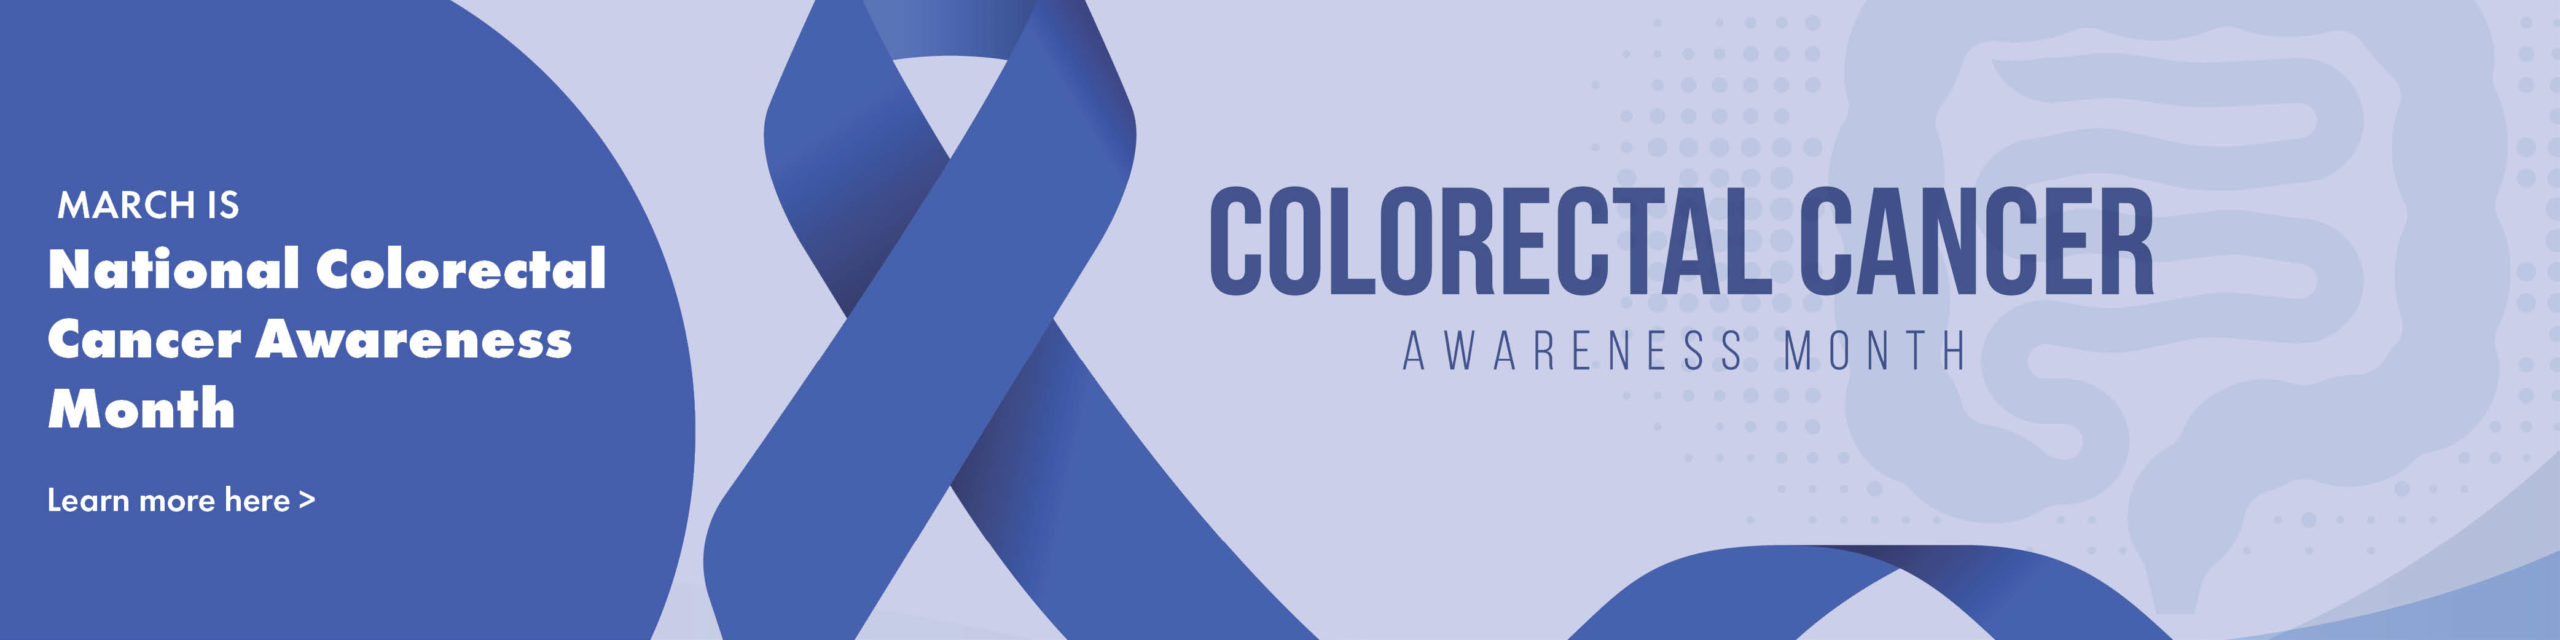 march is nch colorectal month